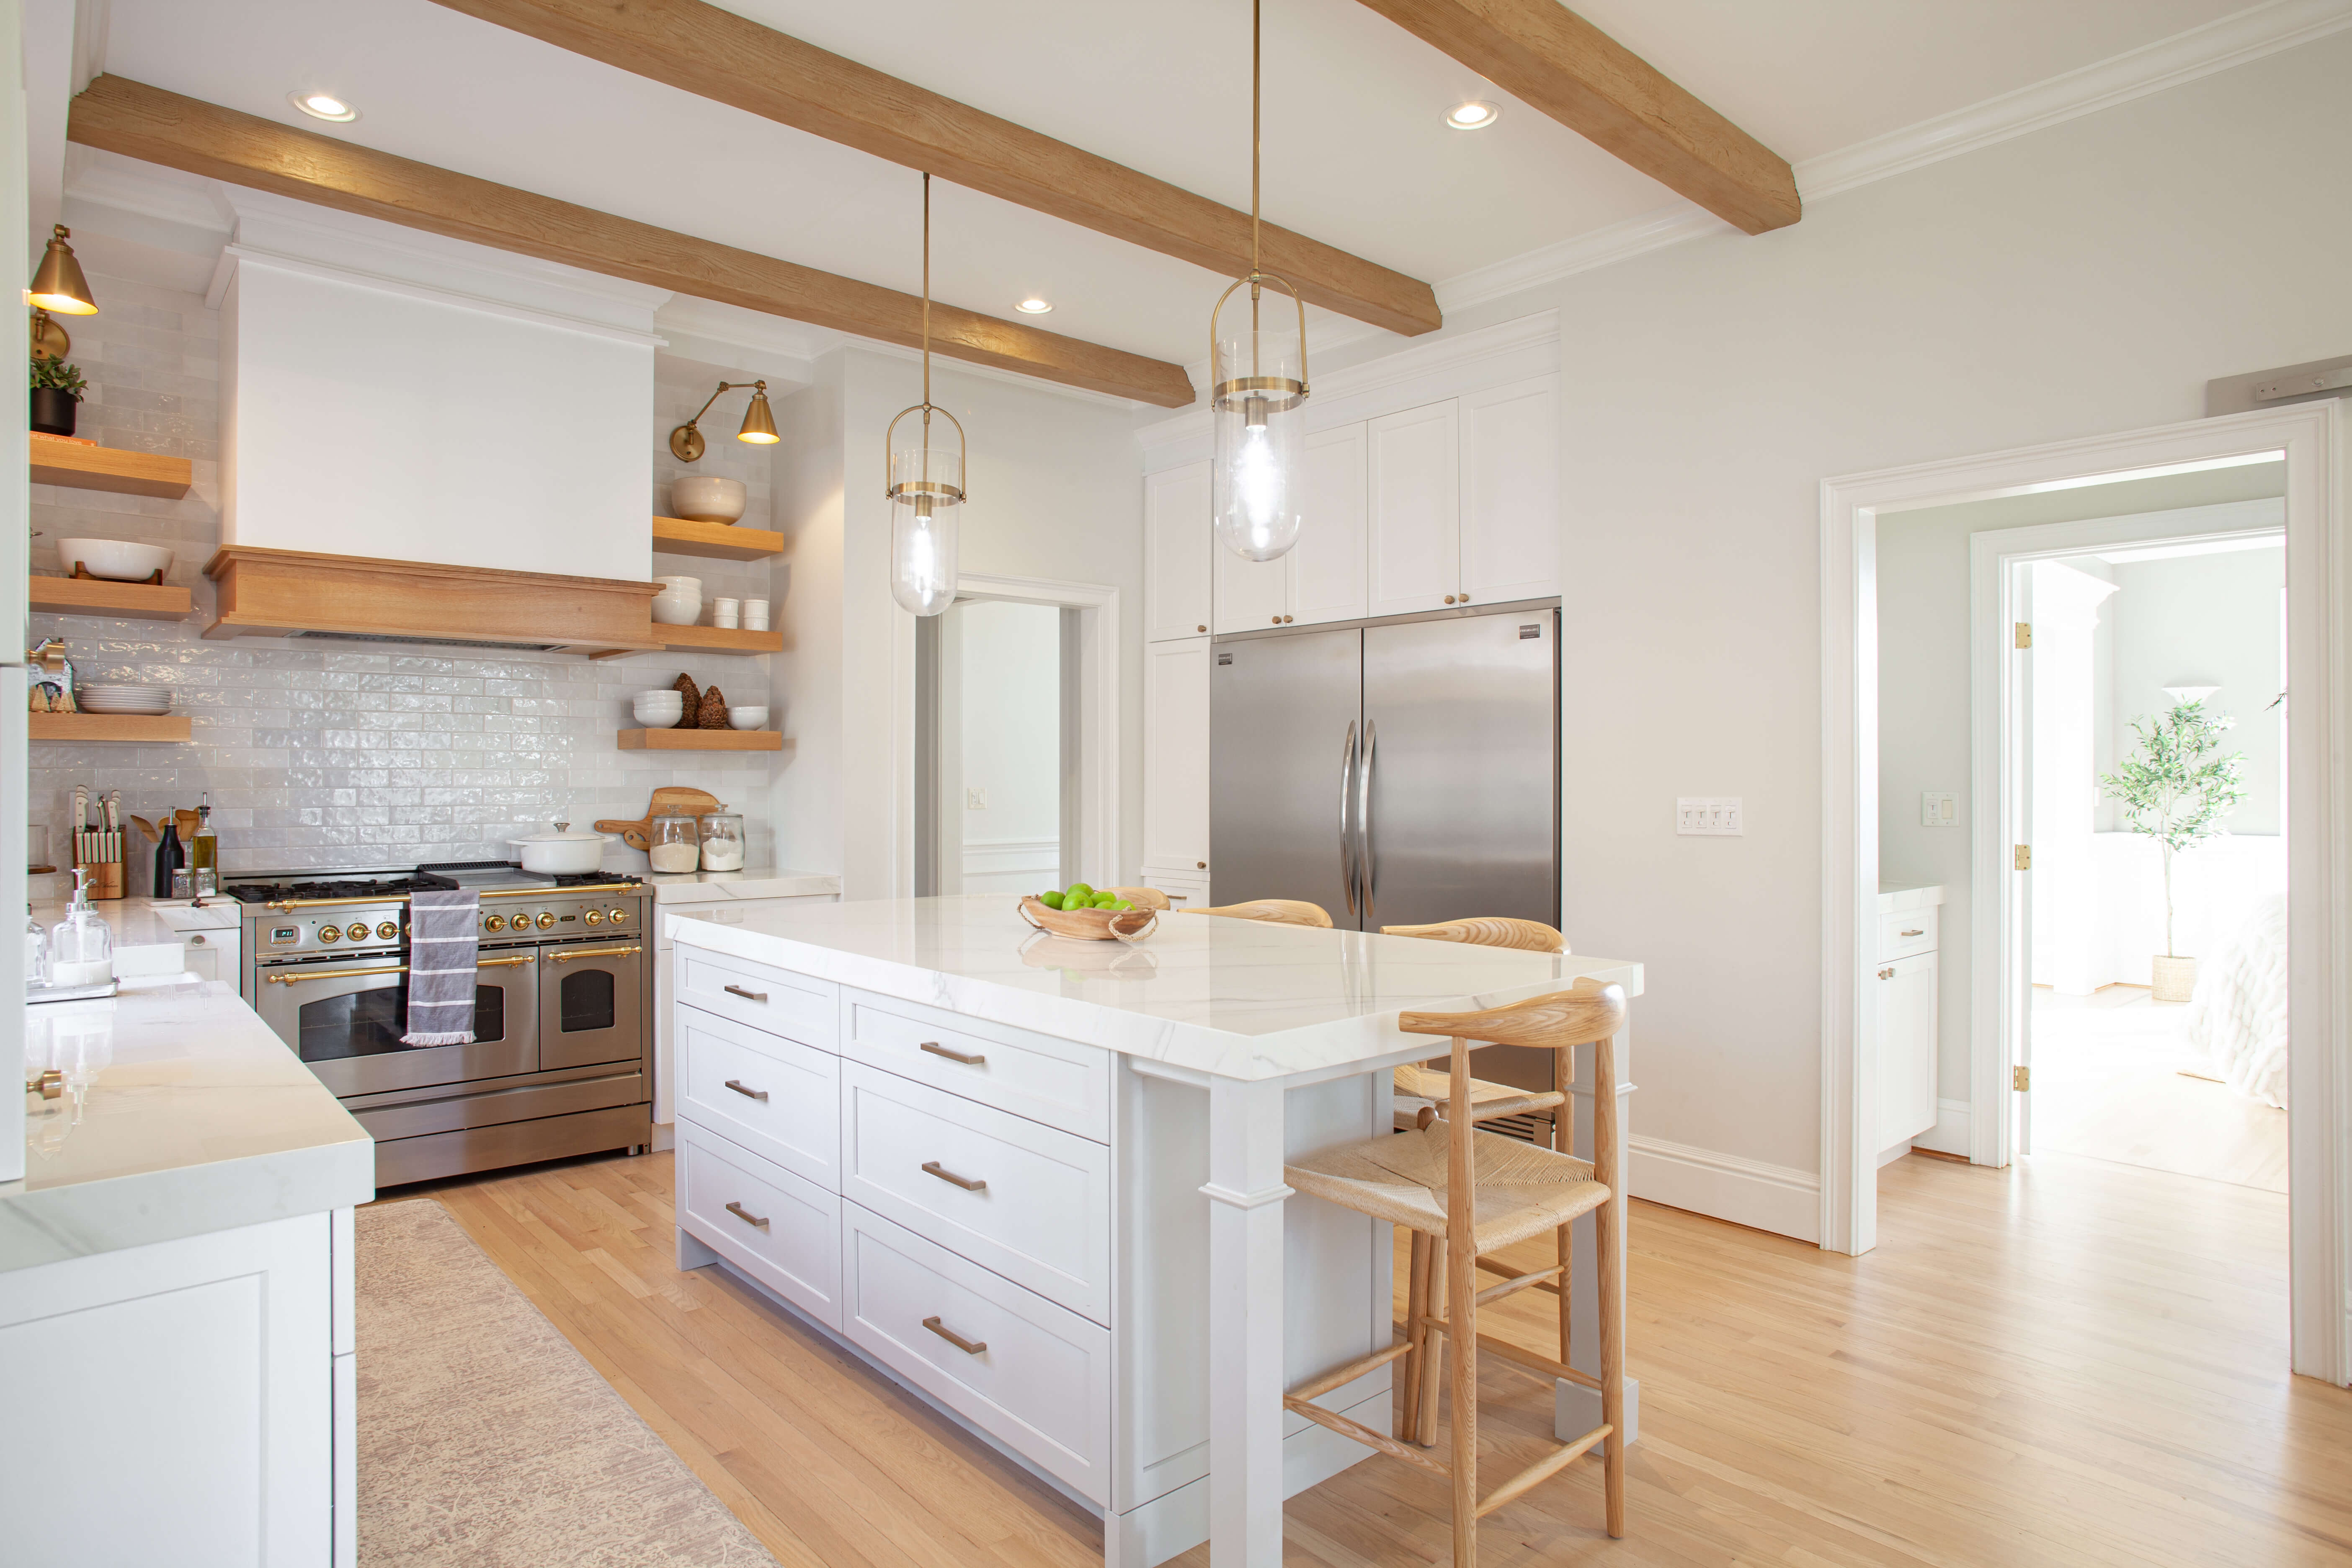 A beautiful white kitchen with light stained Quarter-Sawn White Oak accents for the wood hood frieze, floating shelves, and ceiling beams.